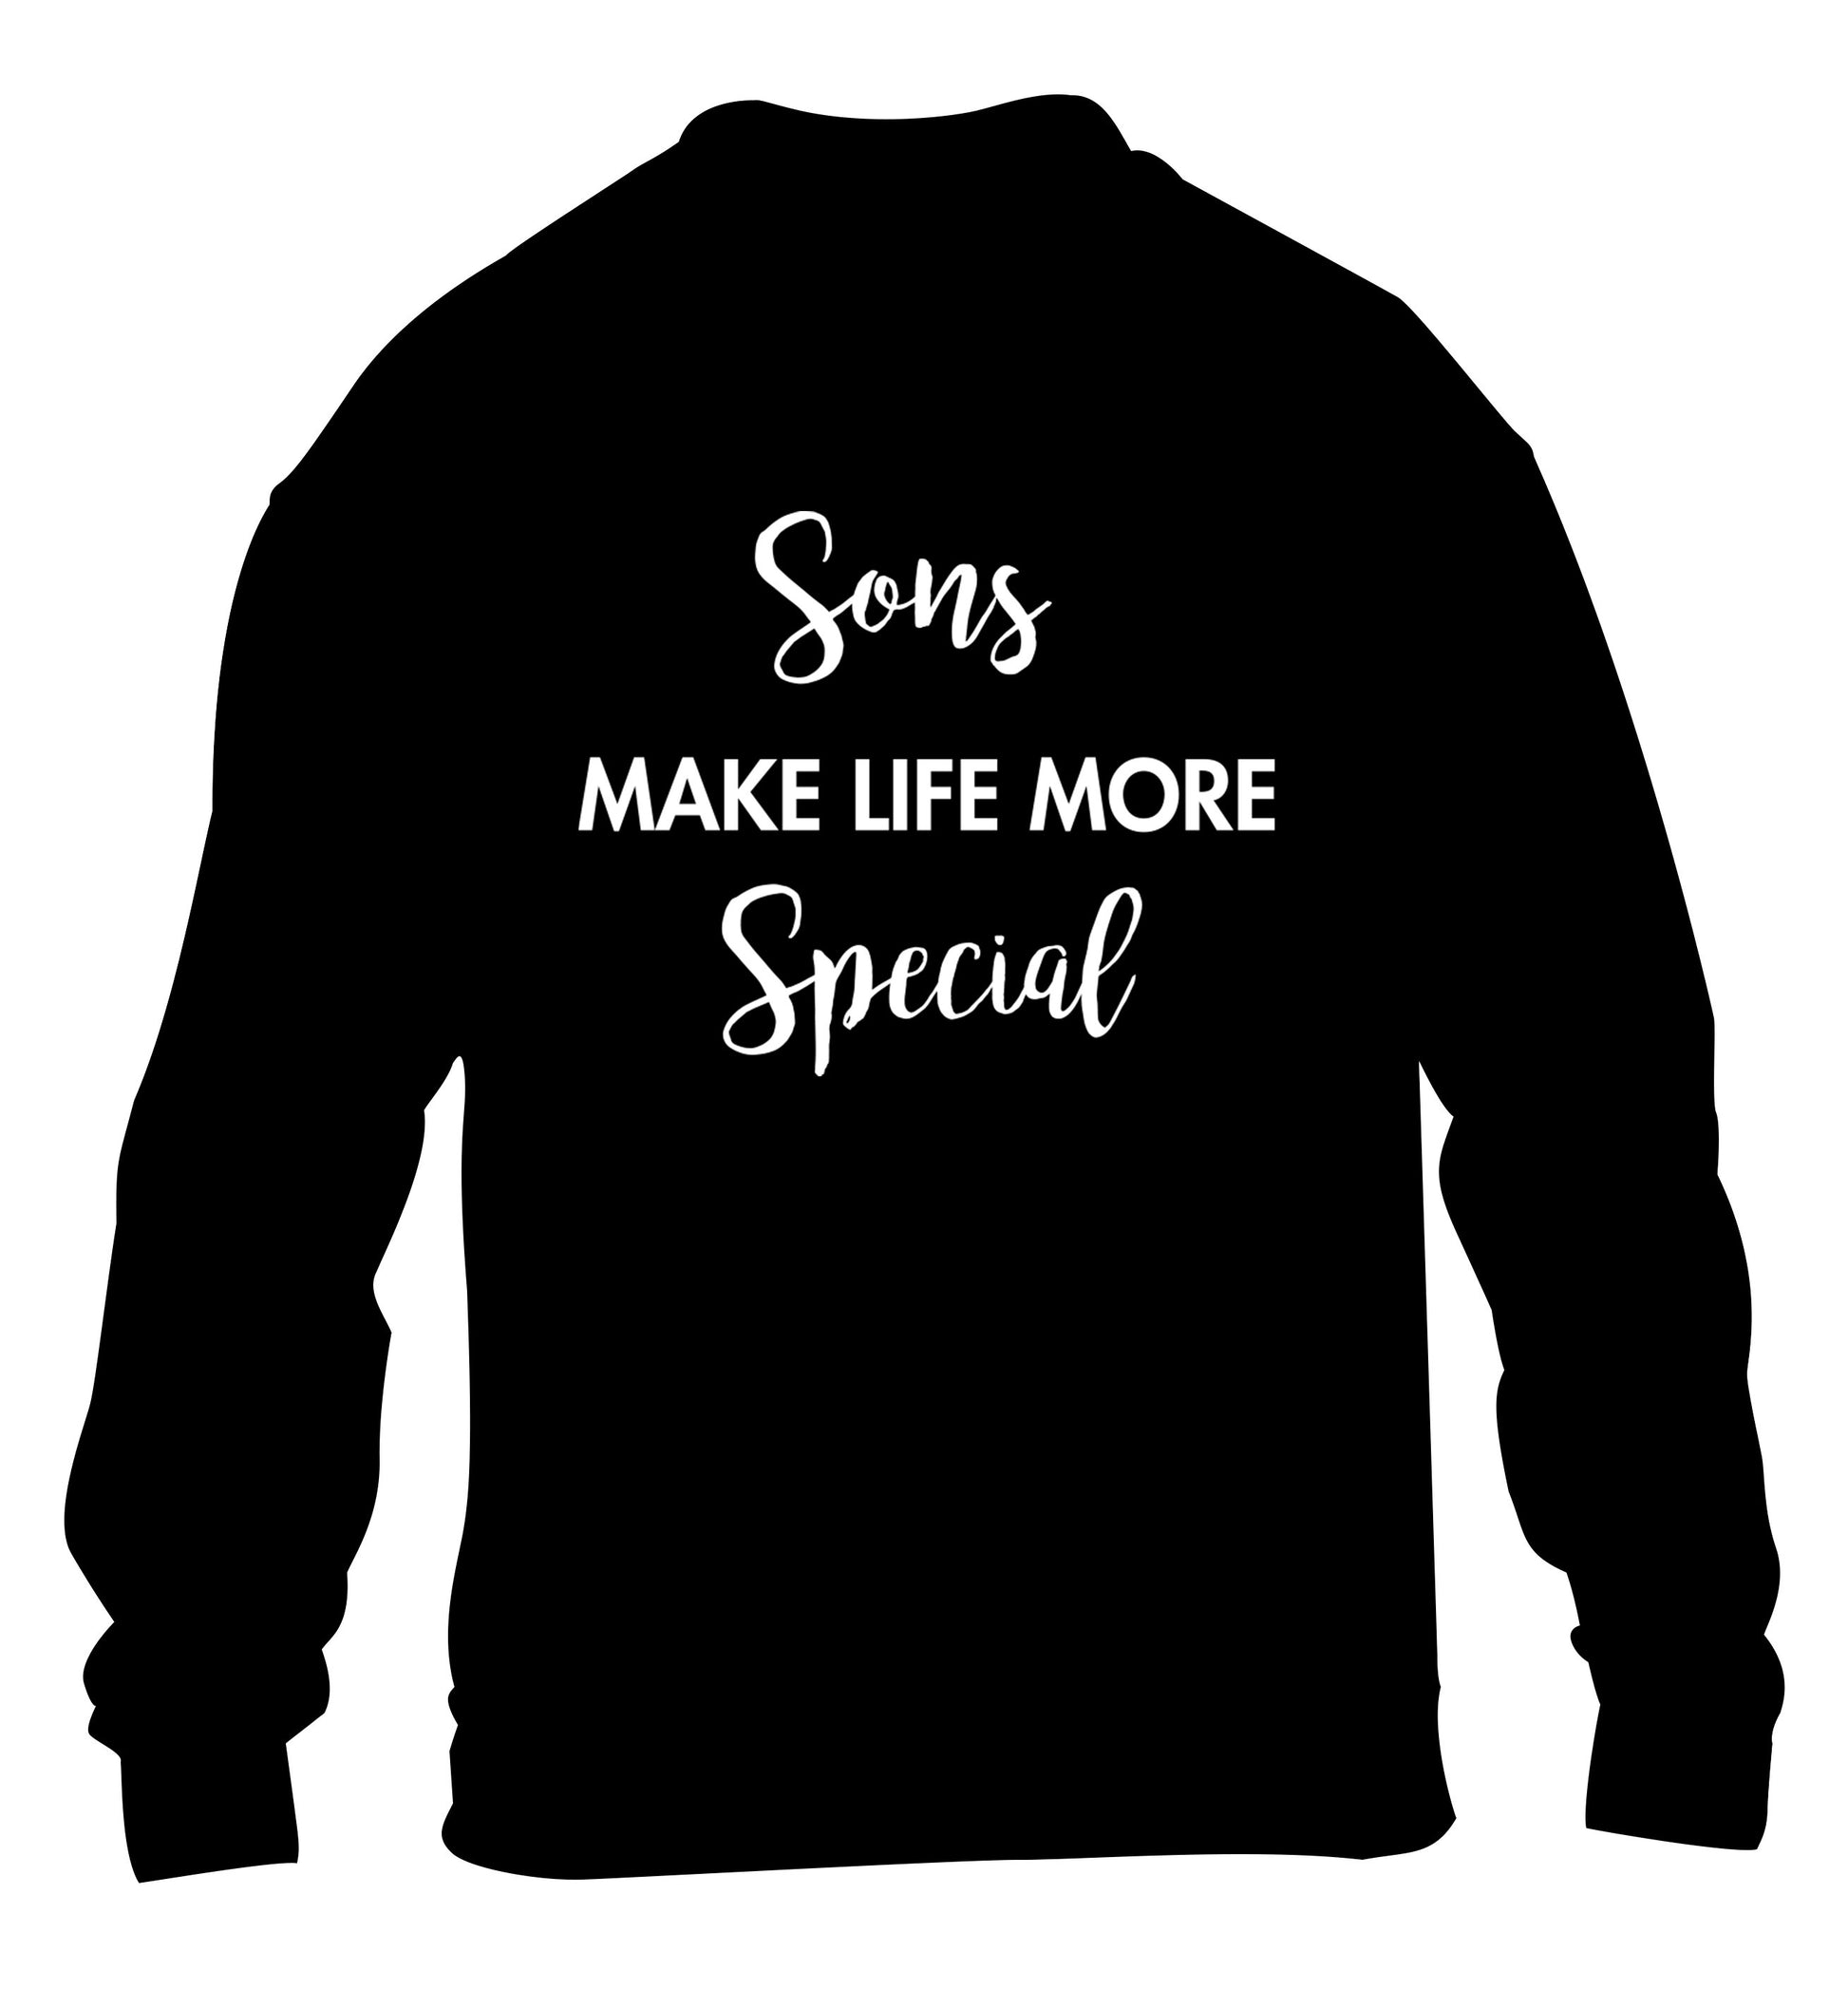 Sons make life more special children's black sweater 12-14 Years